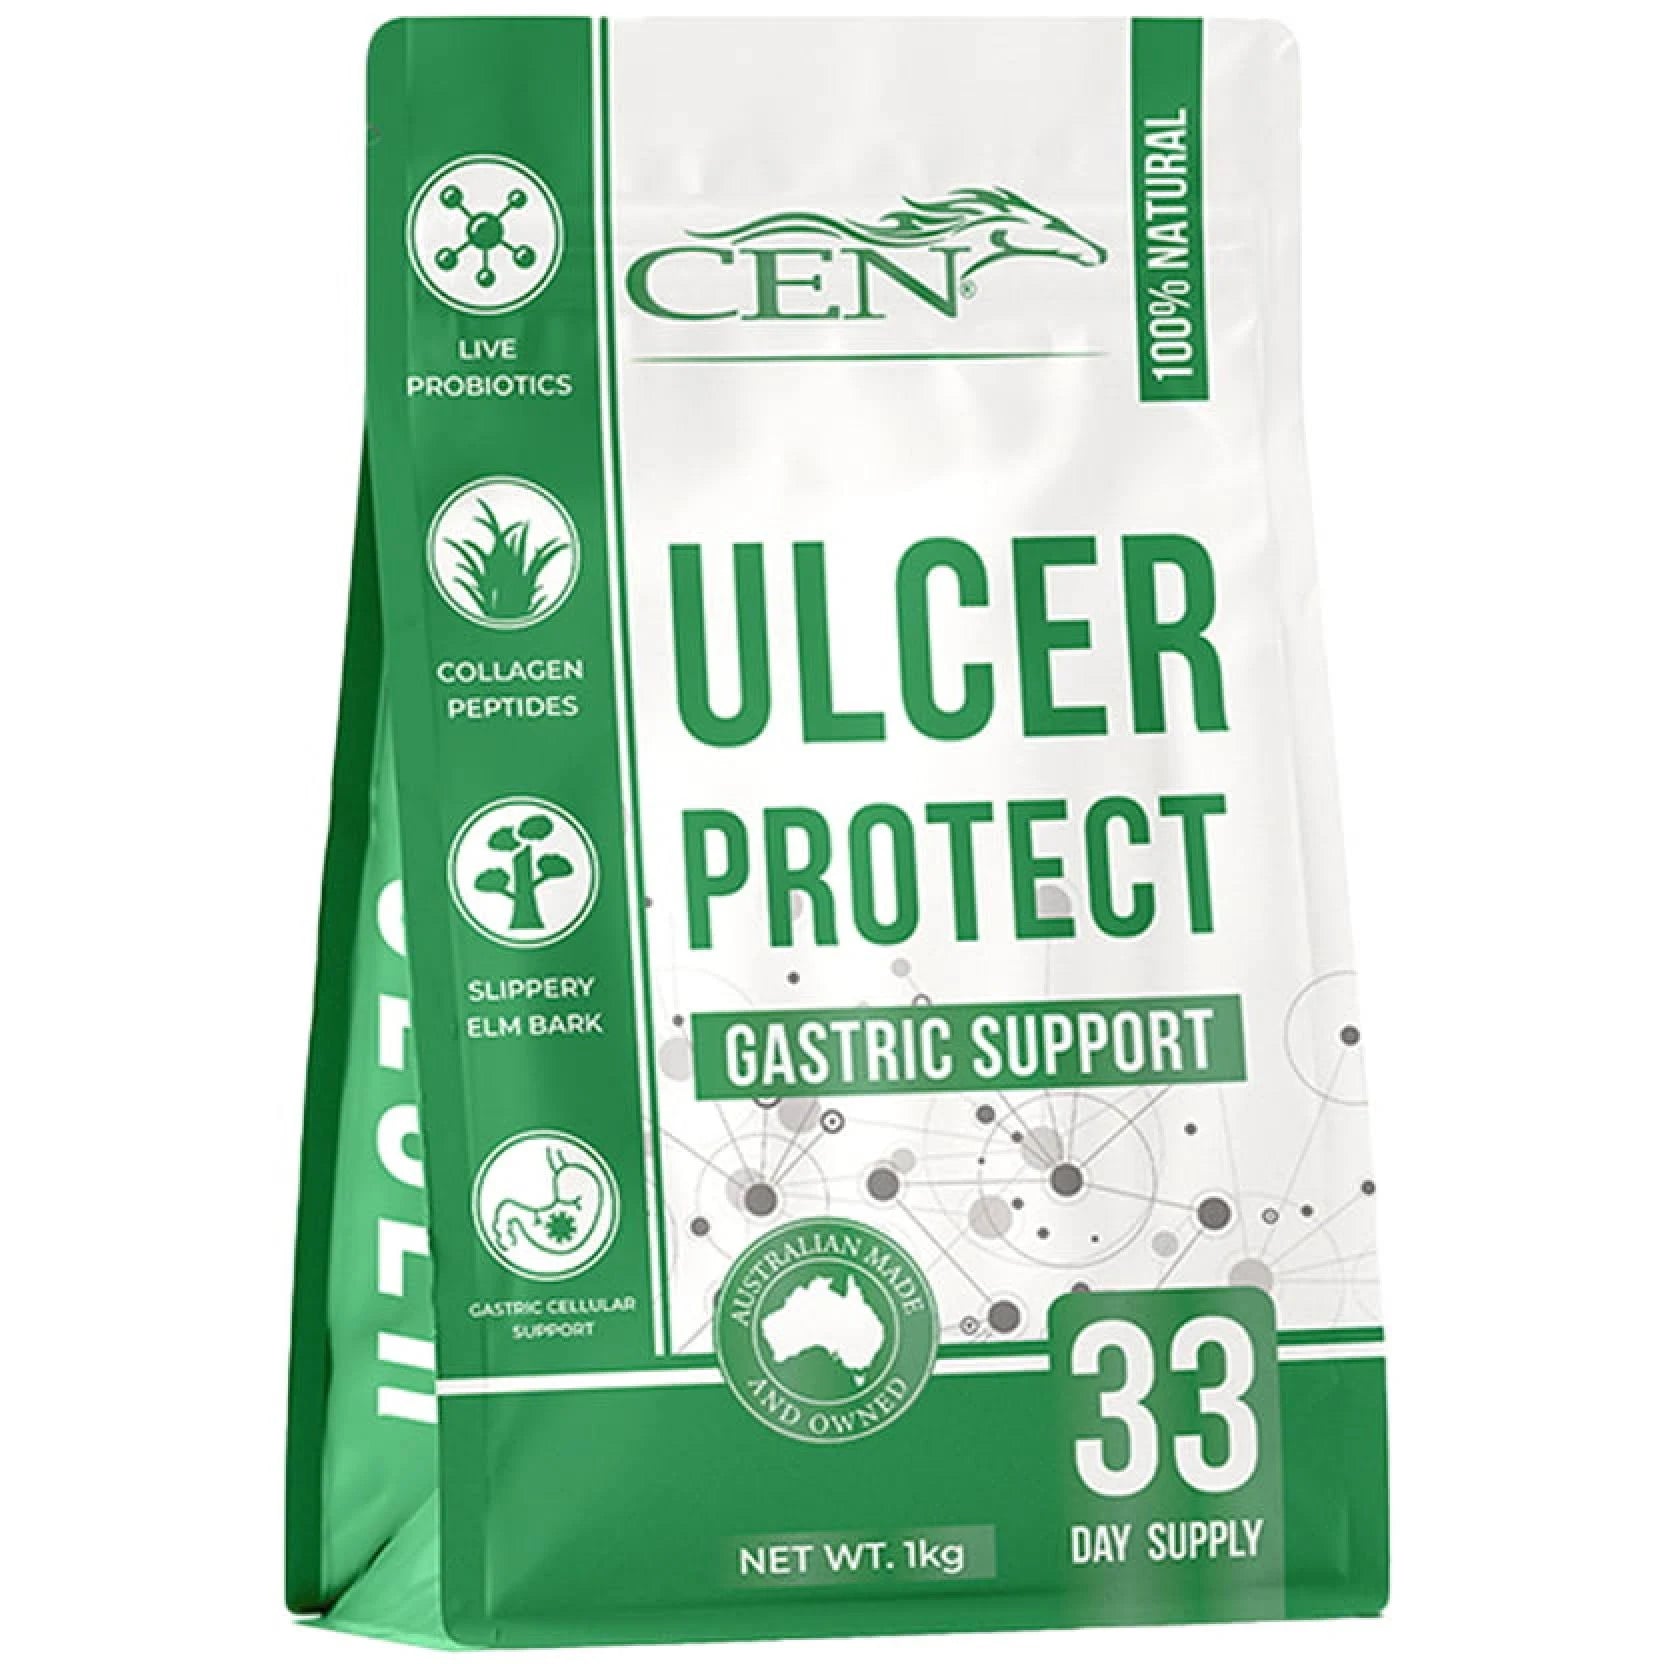 Cen Ulcer Protect